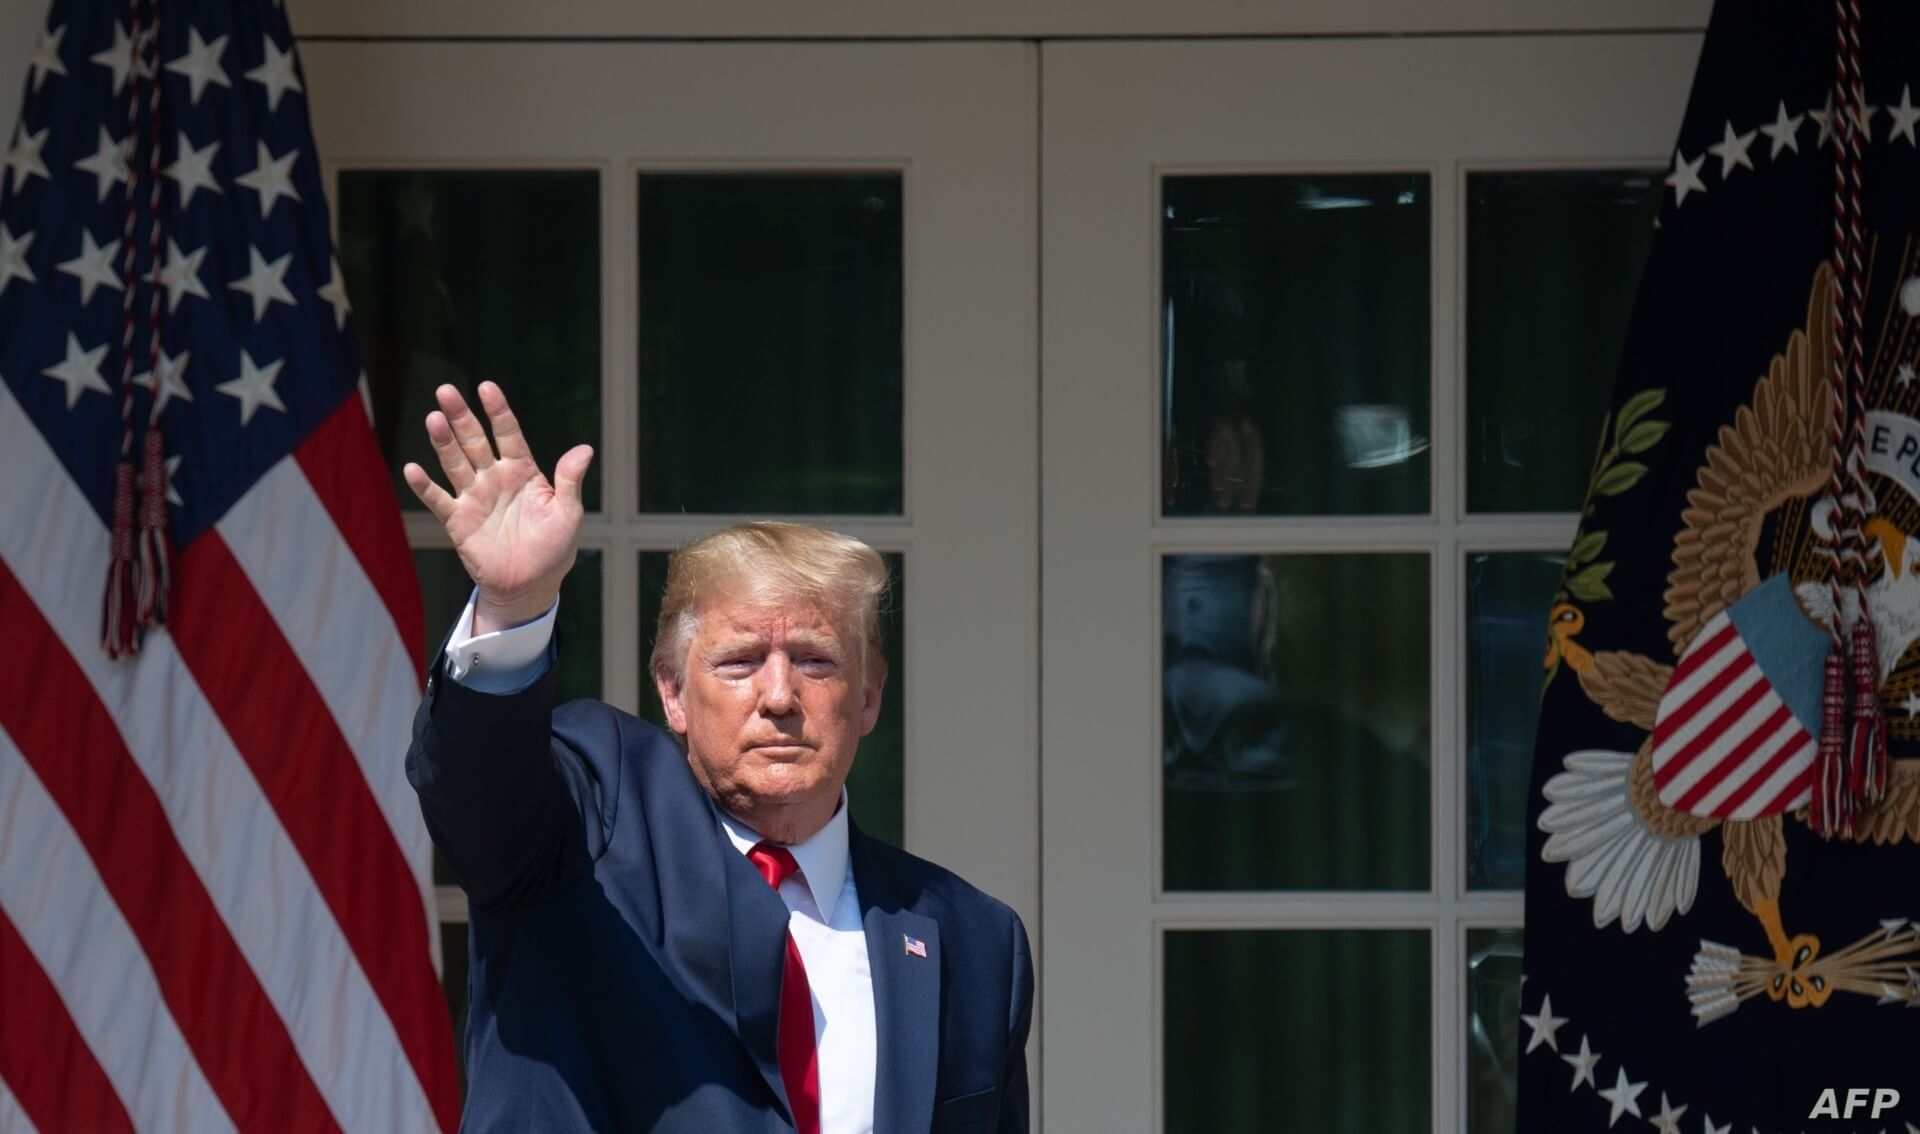 US President Donald Trump waves after signing HR 1327, an act to permanently authorize the September 11th victim compensation fund, during a ceremony in the Rose Garden of the White House in Washington, DC, July 29, 2019. / AFP / SAUL LOEB